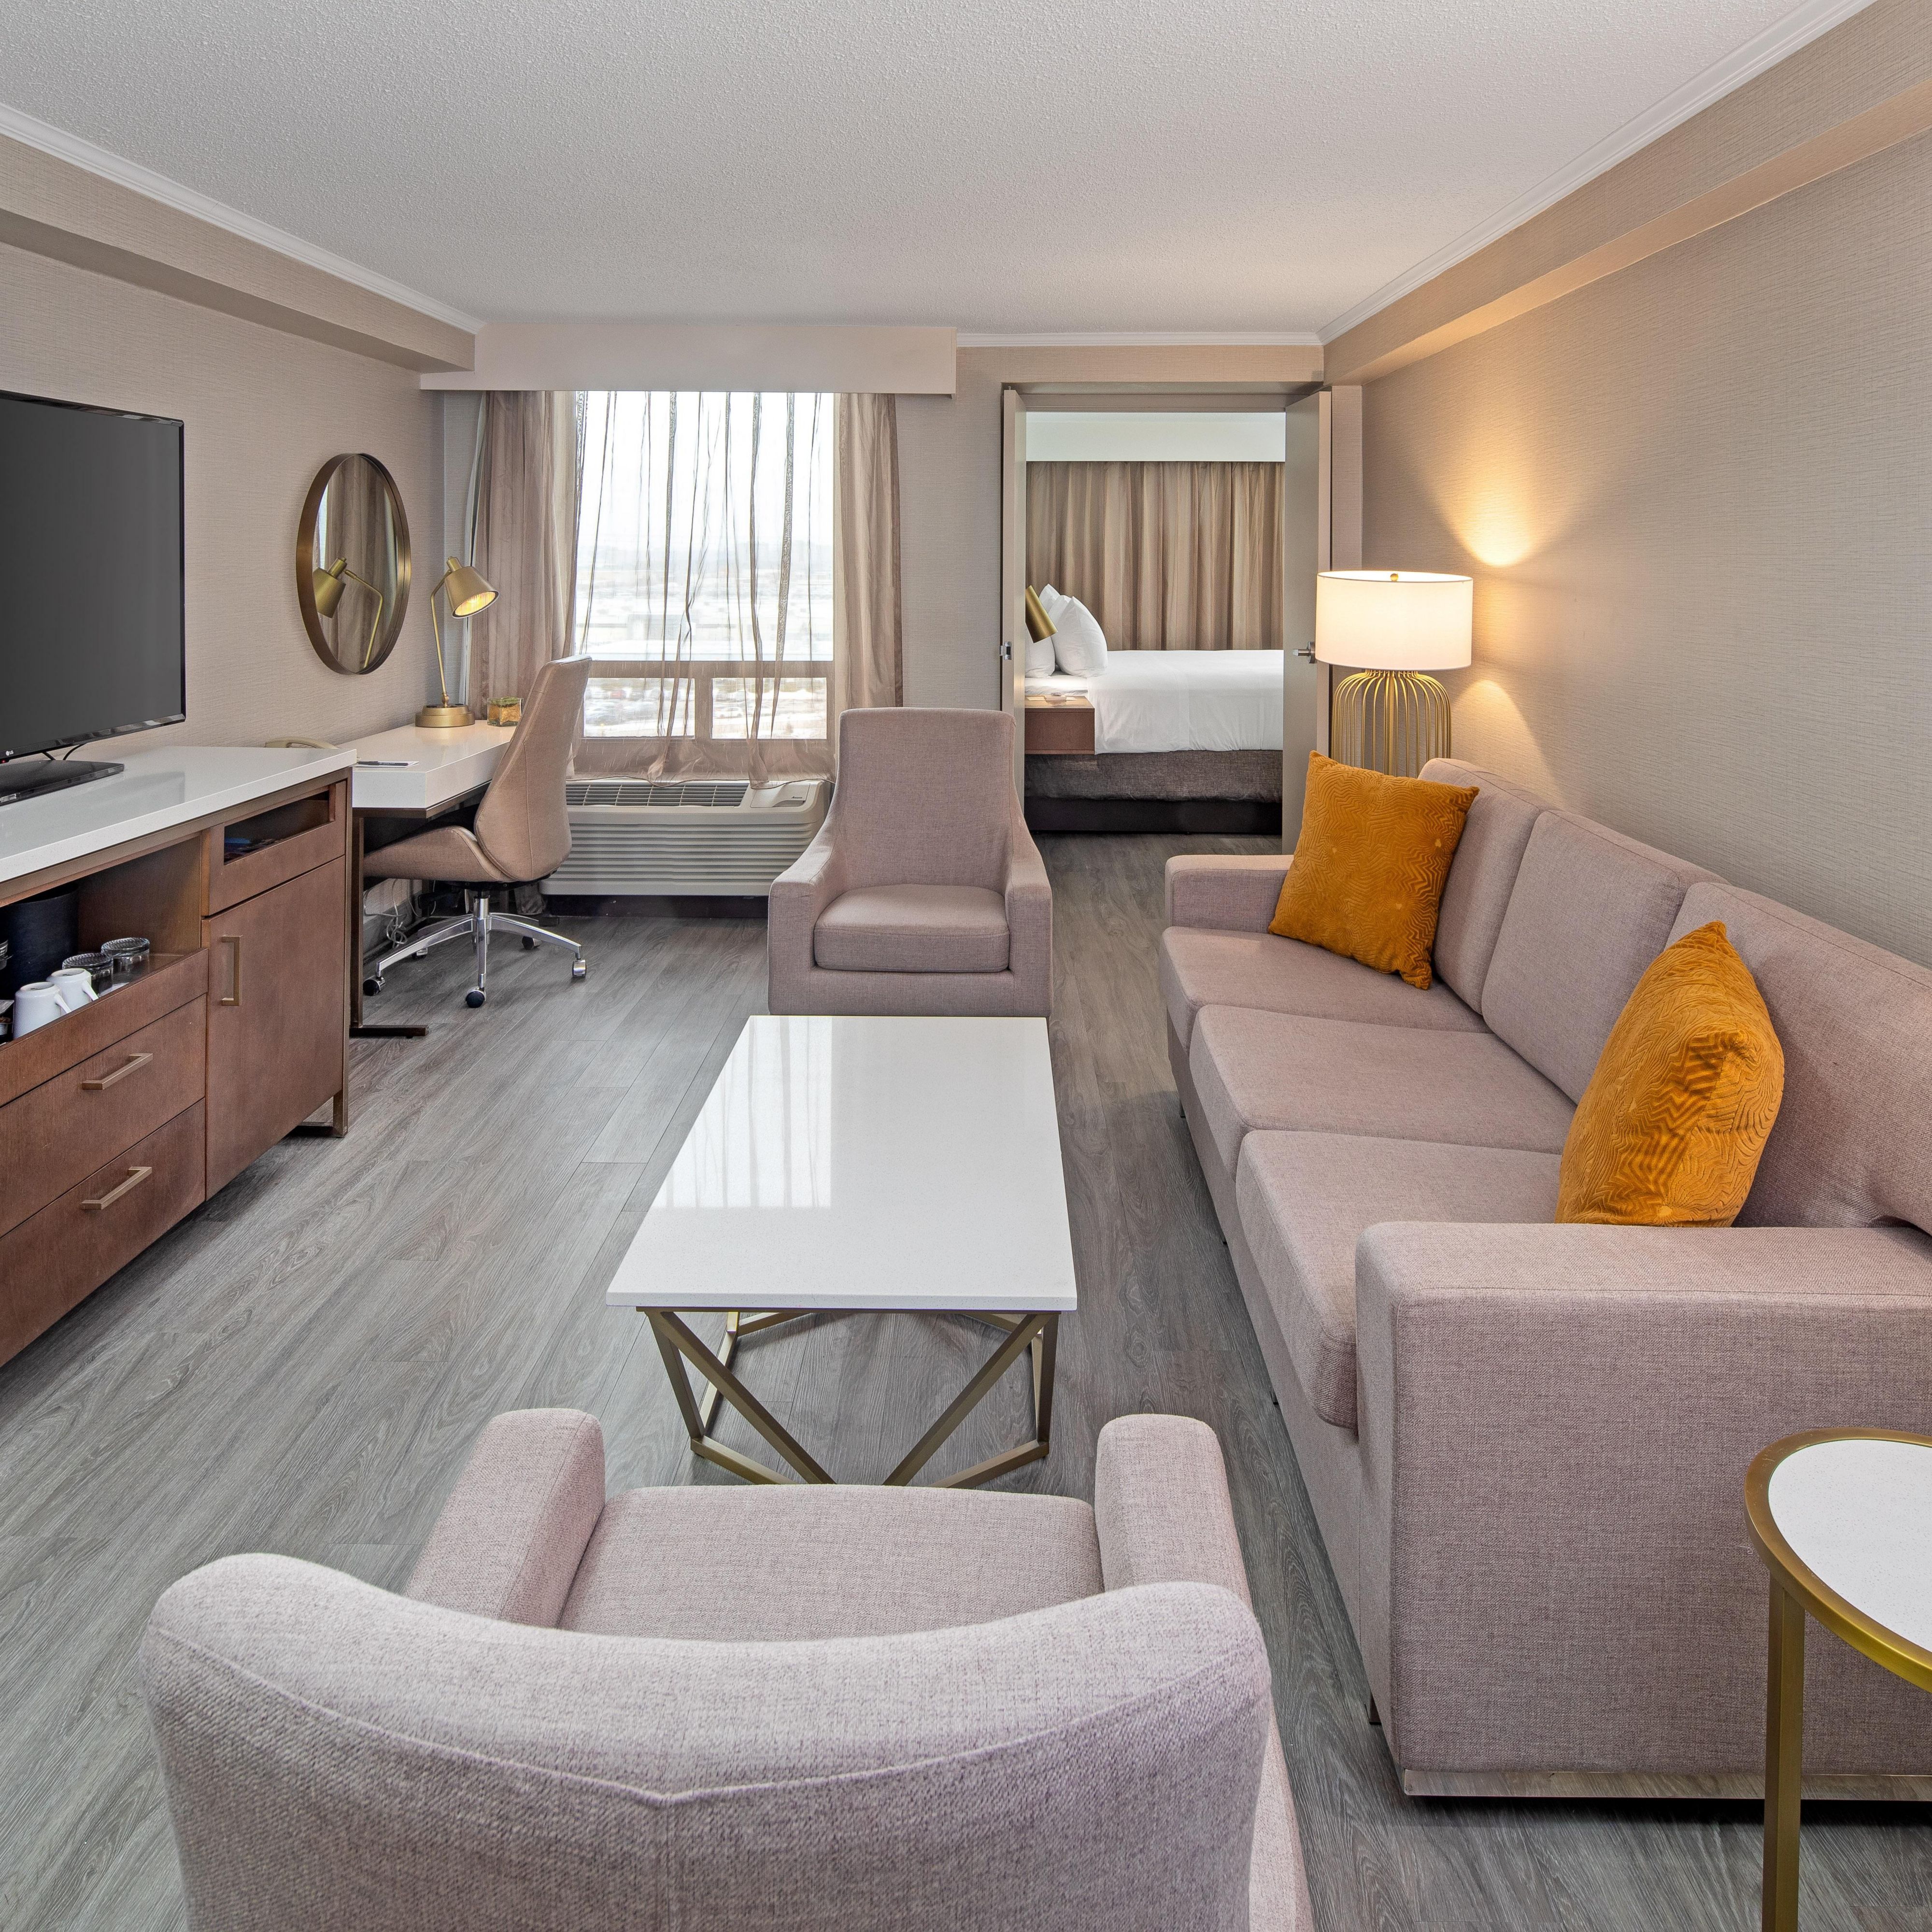 Our beautiful King Suites have the extra space you&#39;re looking for